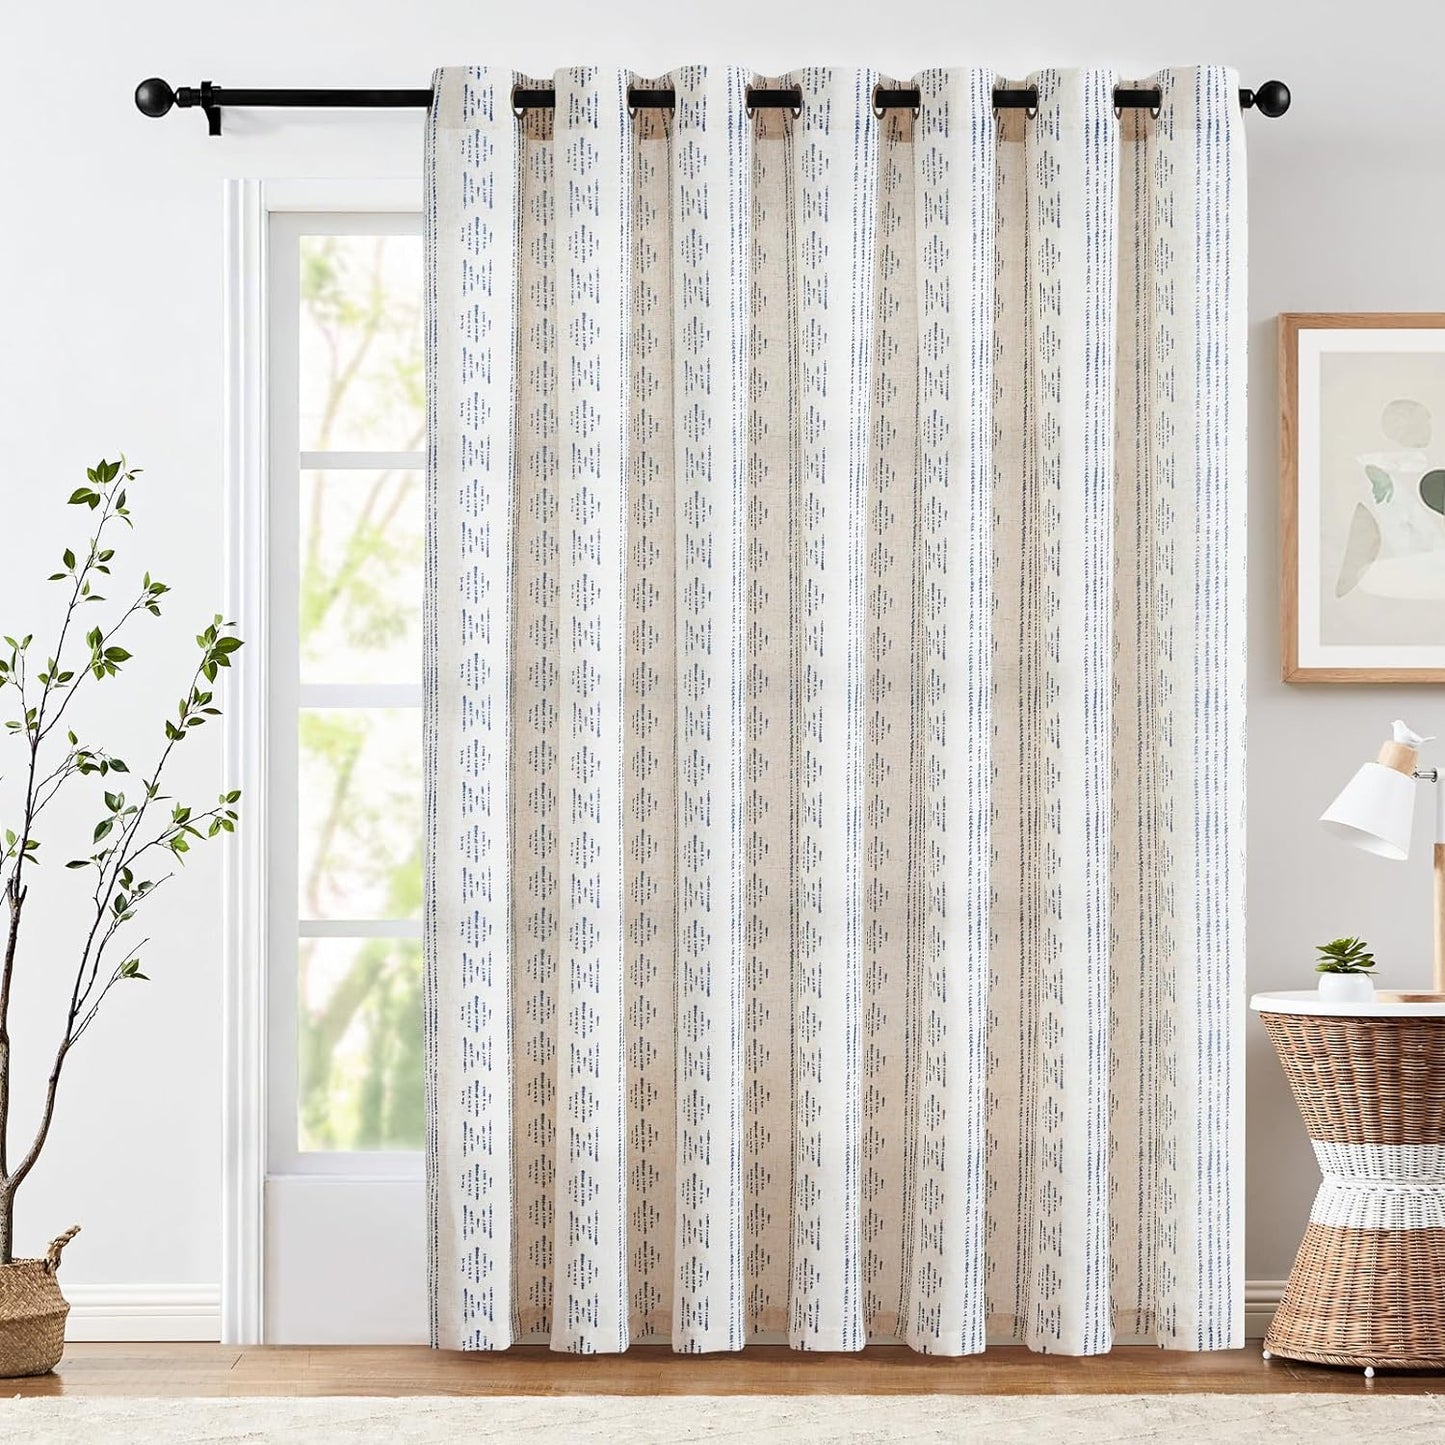 Jinchan Boho Curtains Linen Sliding Patio Door Curtains 84 Inches Long 1 Panel Divider Drapes Extra Wide Black Farmhouse Curtains for Living Room Geometric Striped Light Filtering Grommet Curtains  CKNY HOME FASHION Boho| Blue On Flax W100 X L84 